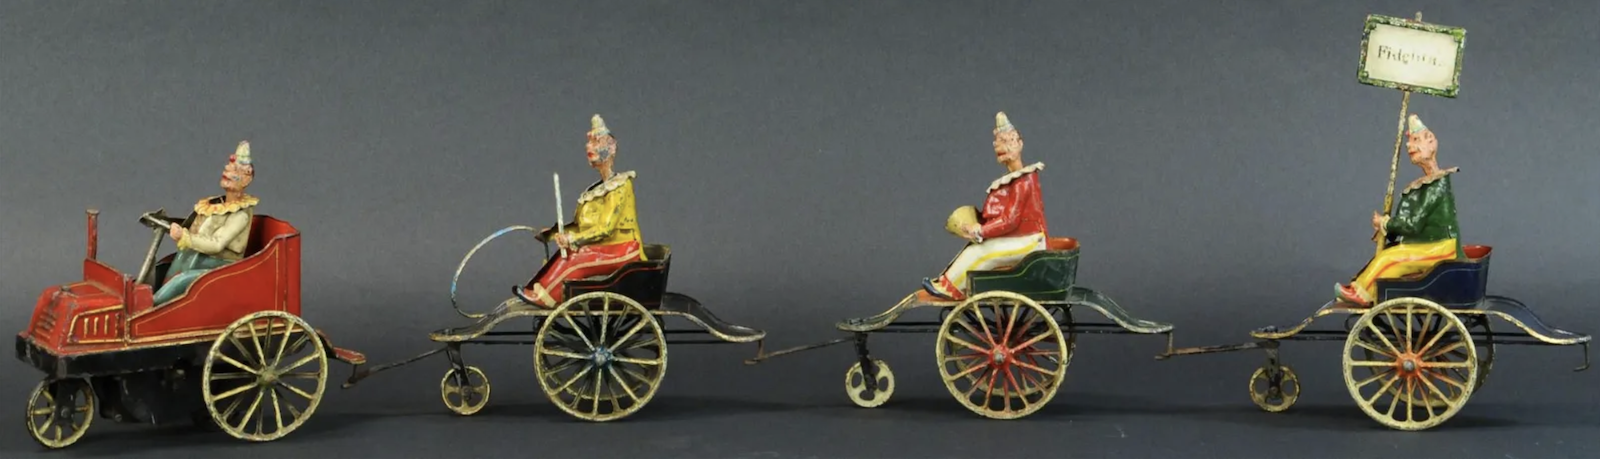 Very rare and important Marklin Fidelitas clown train, 37in long, complete with all original paint. Provenance: UK collection where it has resided for the past half-century. Sold within estimate for $84,000. Image courtesy of Bertoia Auctions